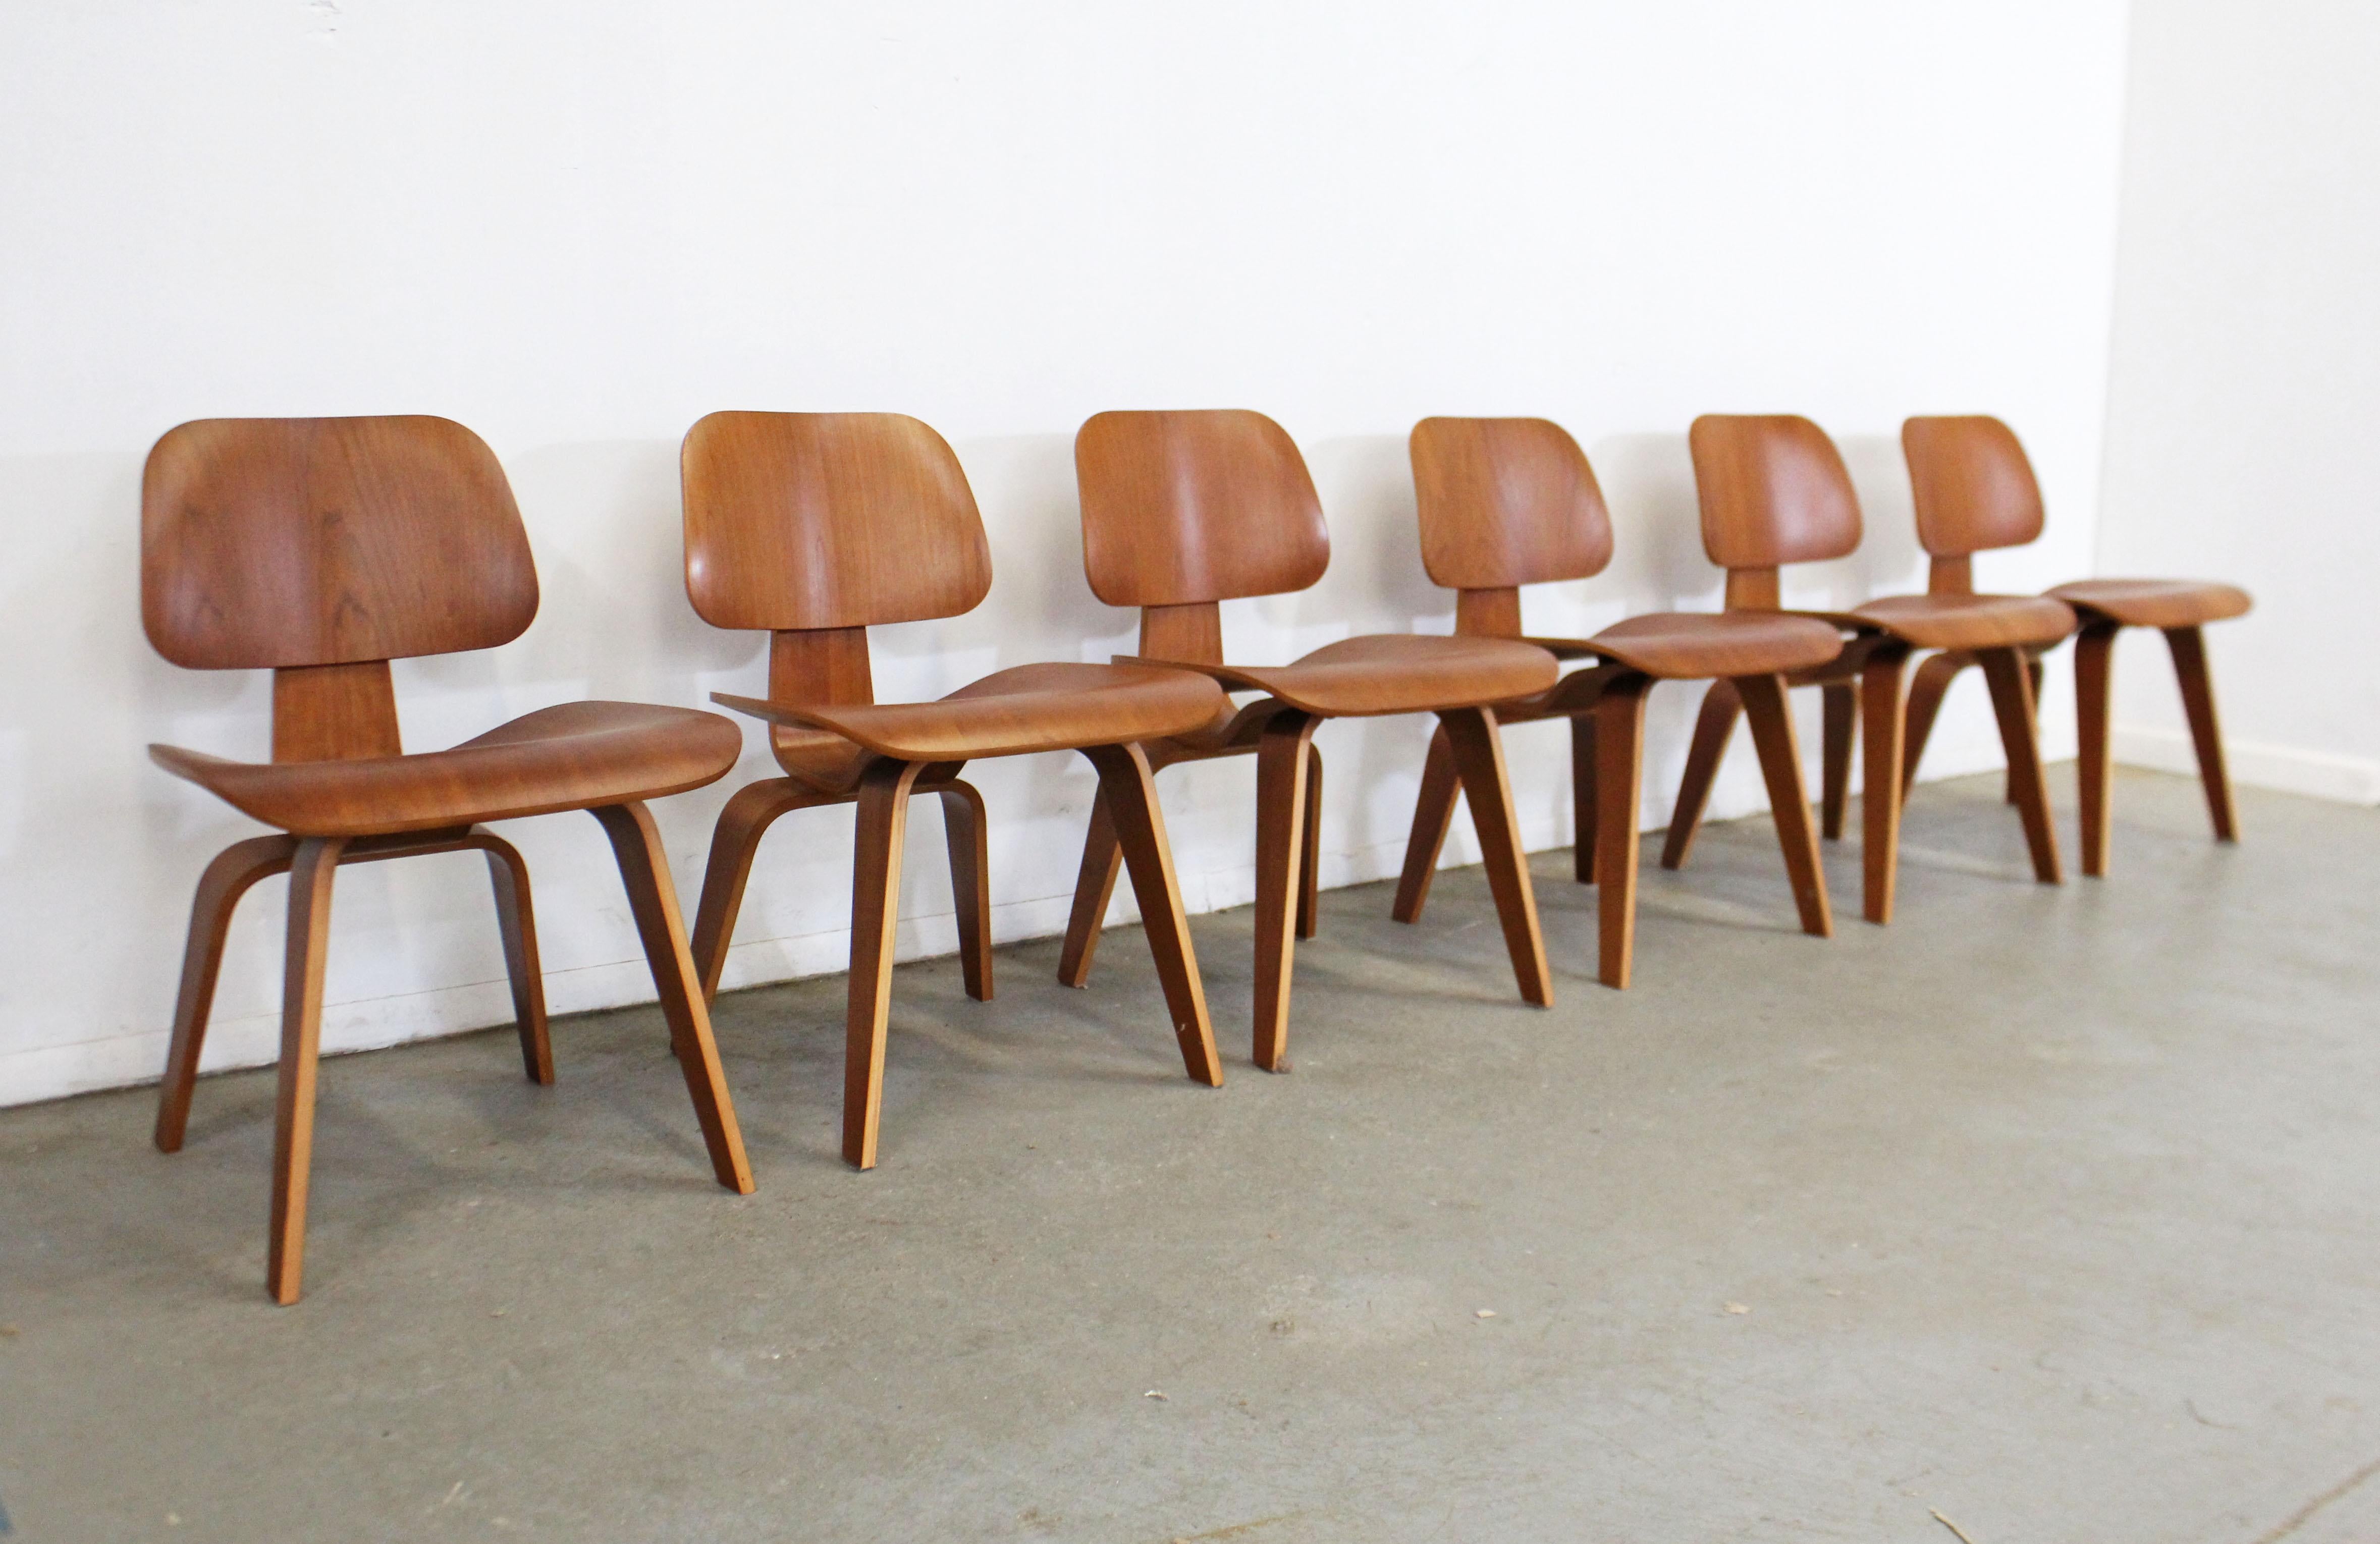 American Set of Six Mid-Century Modern Eames Herman Miller Molded Plywood Dining Chairs